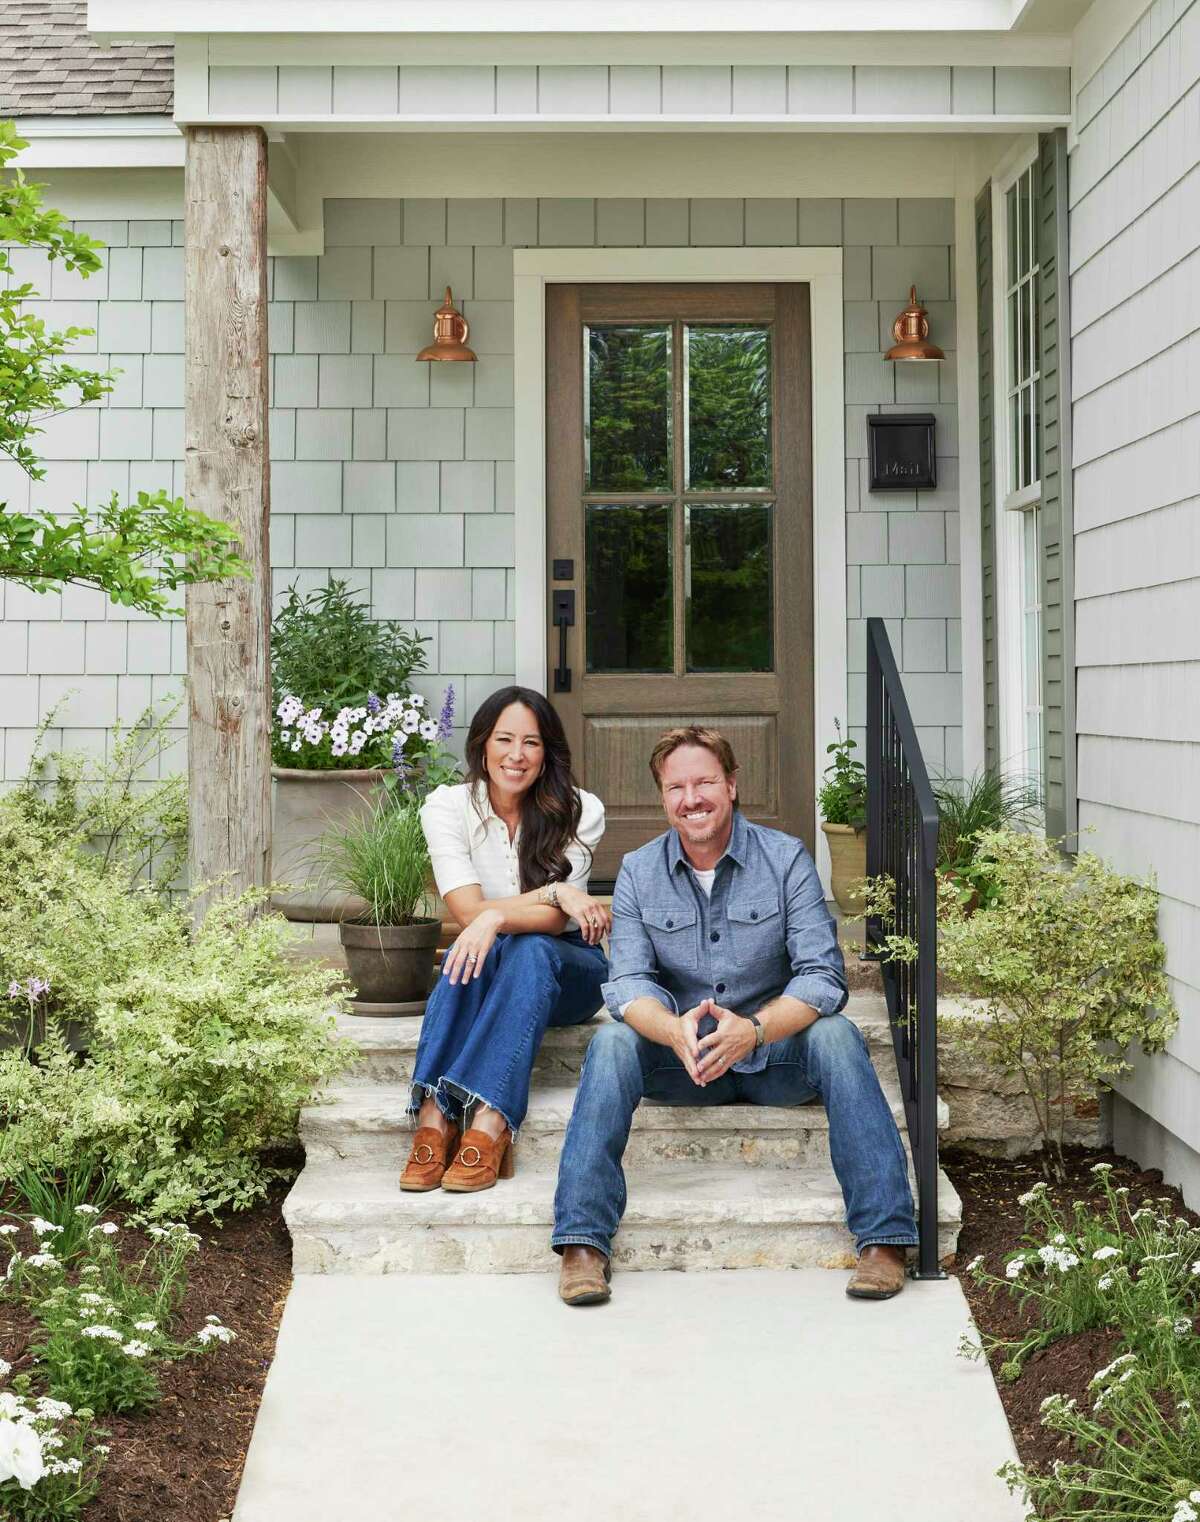 Chip and Joanna Gaines have a new collection of exterior siding with James Hardie, the Magnolia Home James Hardie Collection.